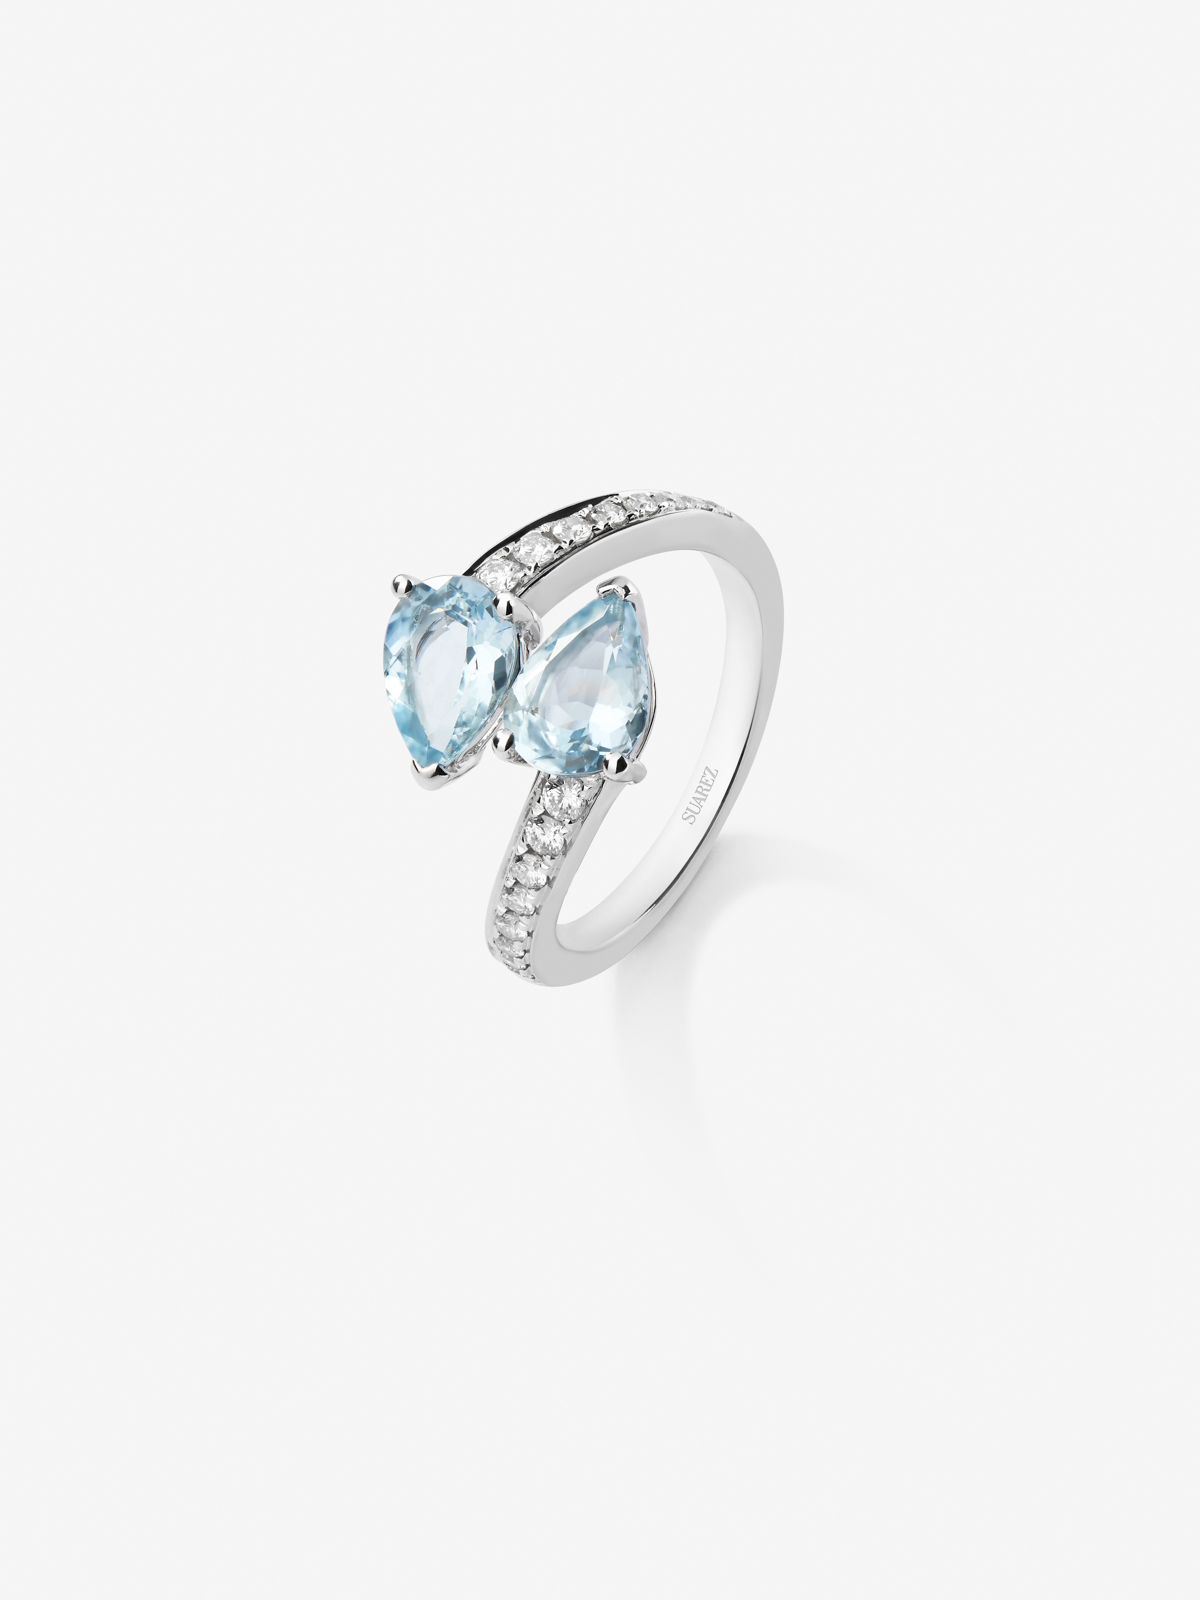 You and I 18k White Gold Ring with Aguamarines Blue in 1.81 cts and diamonds in bright size